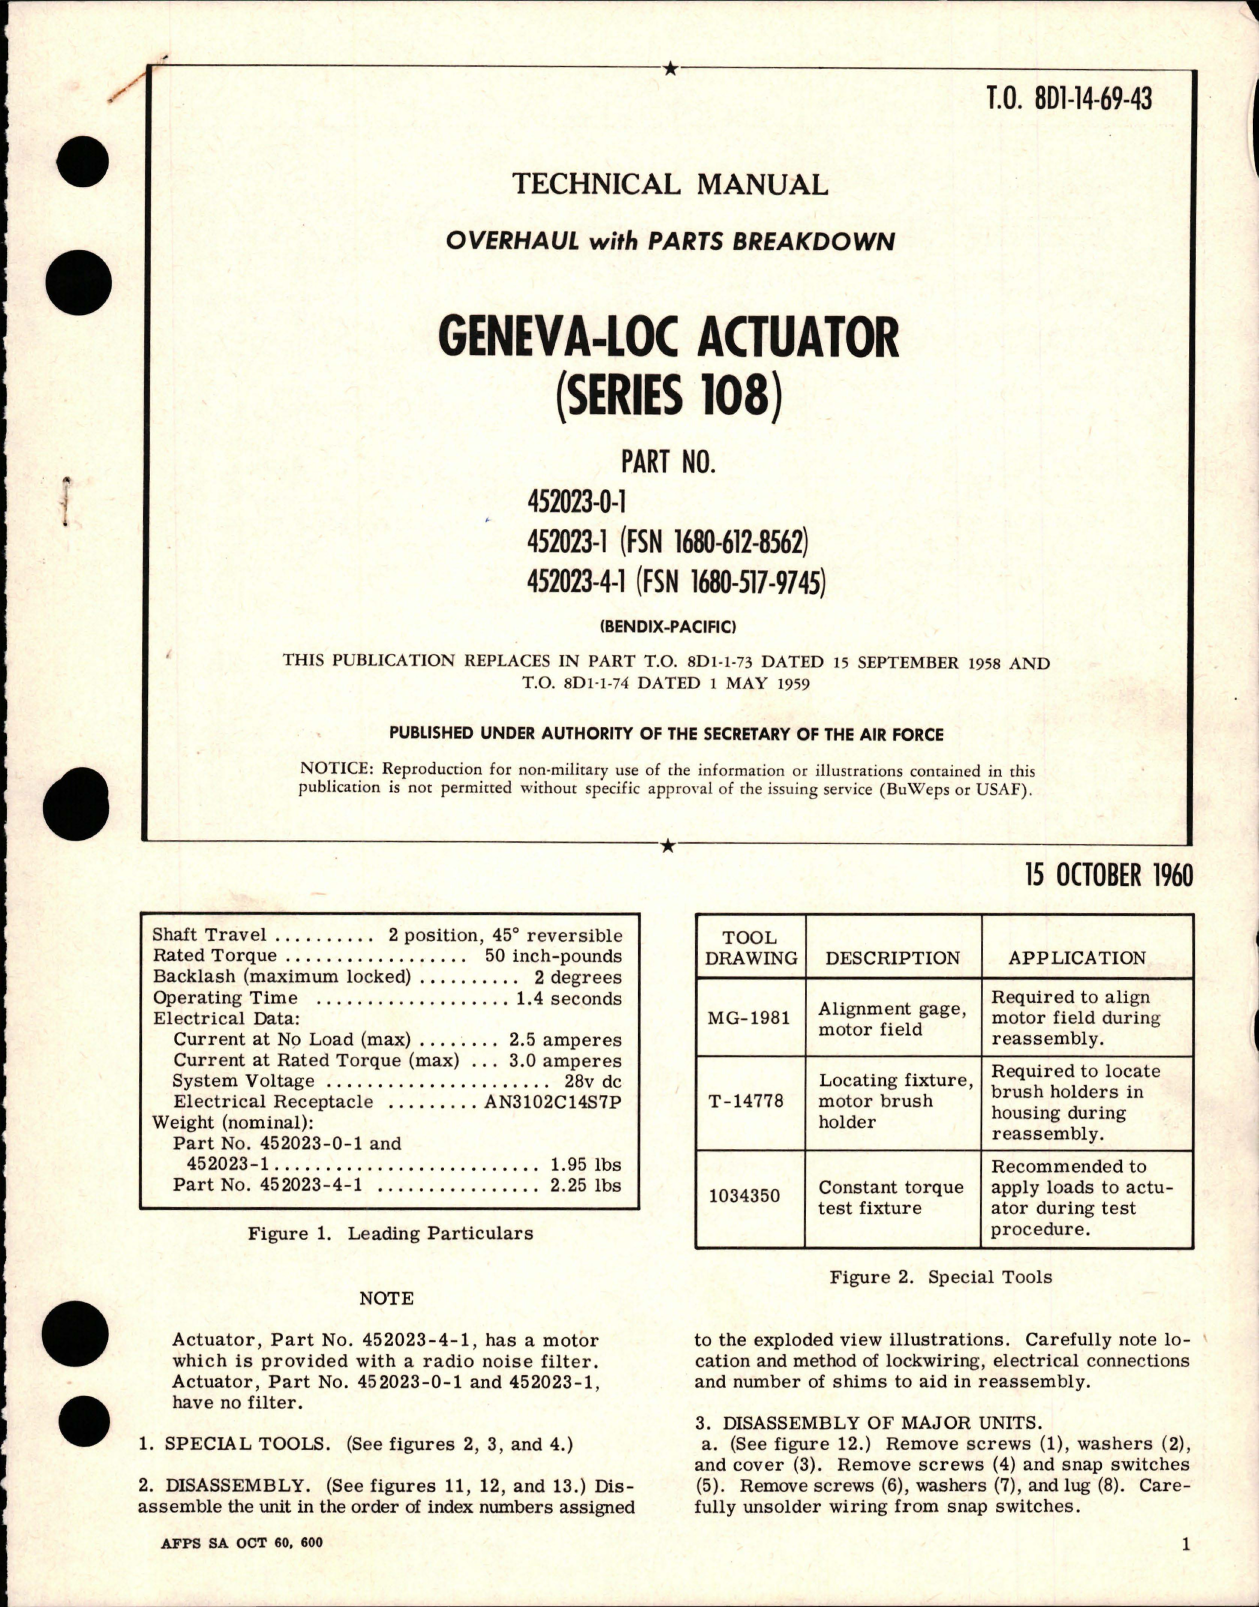 Sample page 1 from AirCorps Library document: Overhaul with Parts Breakdown for Geneva-Loc Actuator - Series 108